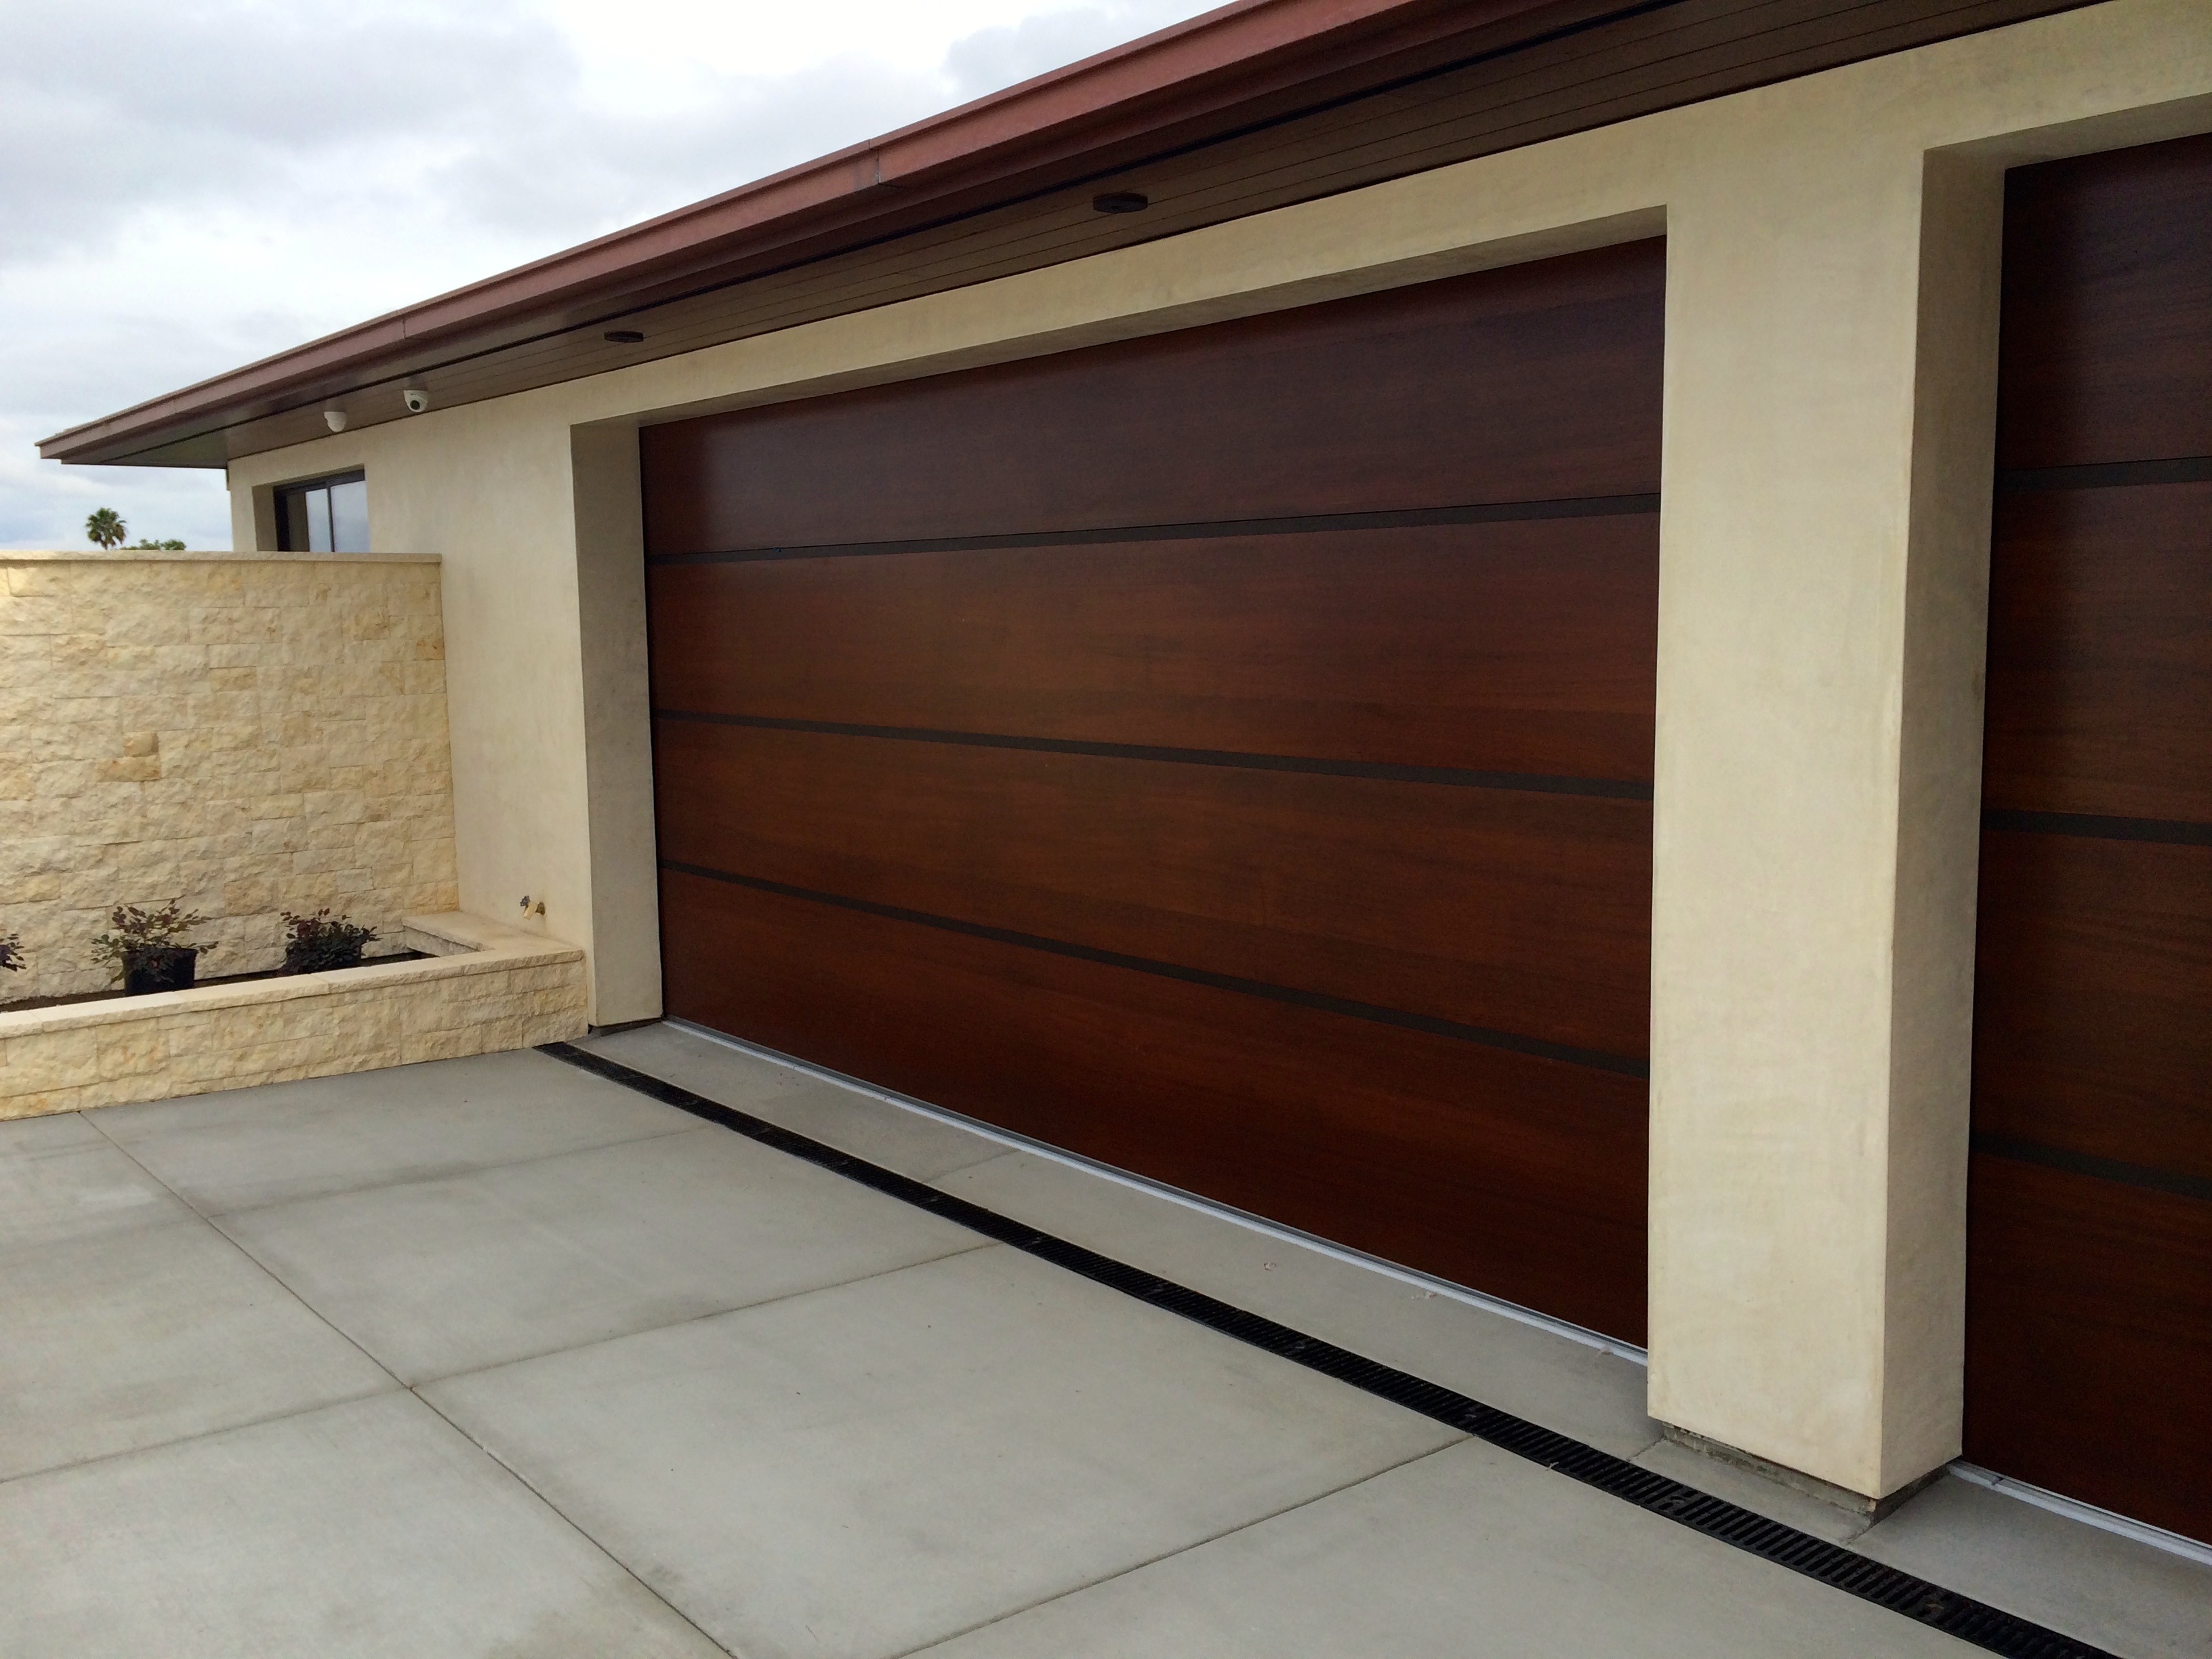 African-Mahogany-Contemporary-Wood-Garage-Door-with-Anodized-Aluminum-Bands-Tungsten-Royce-1